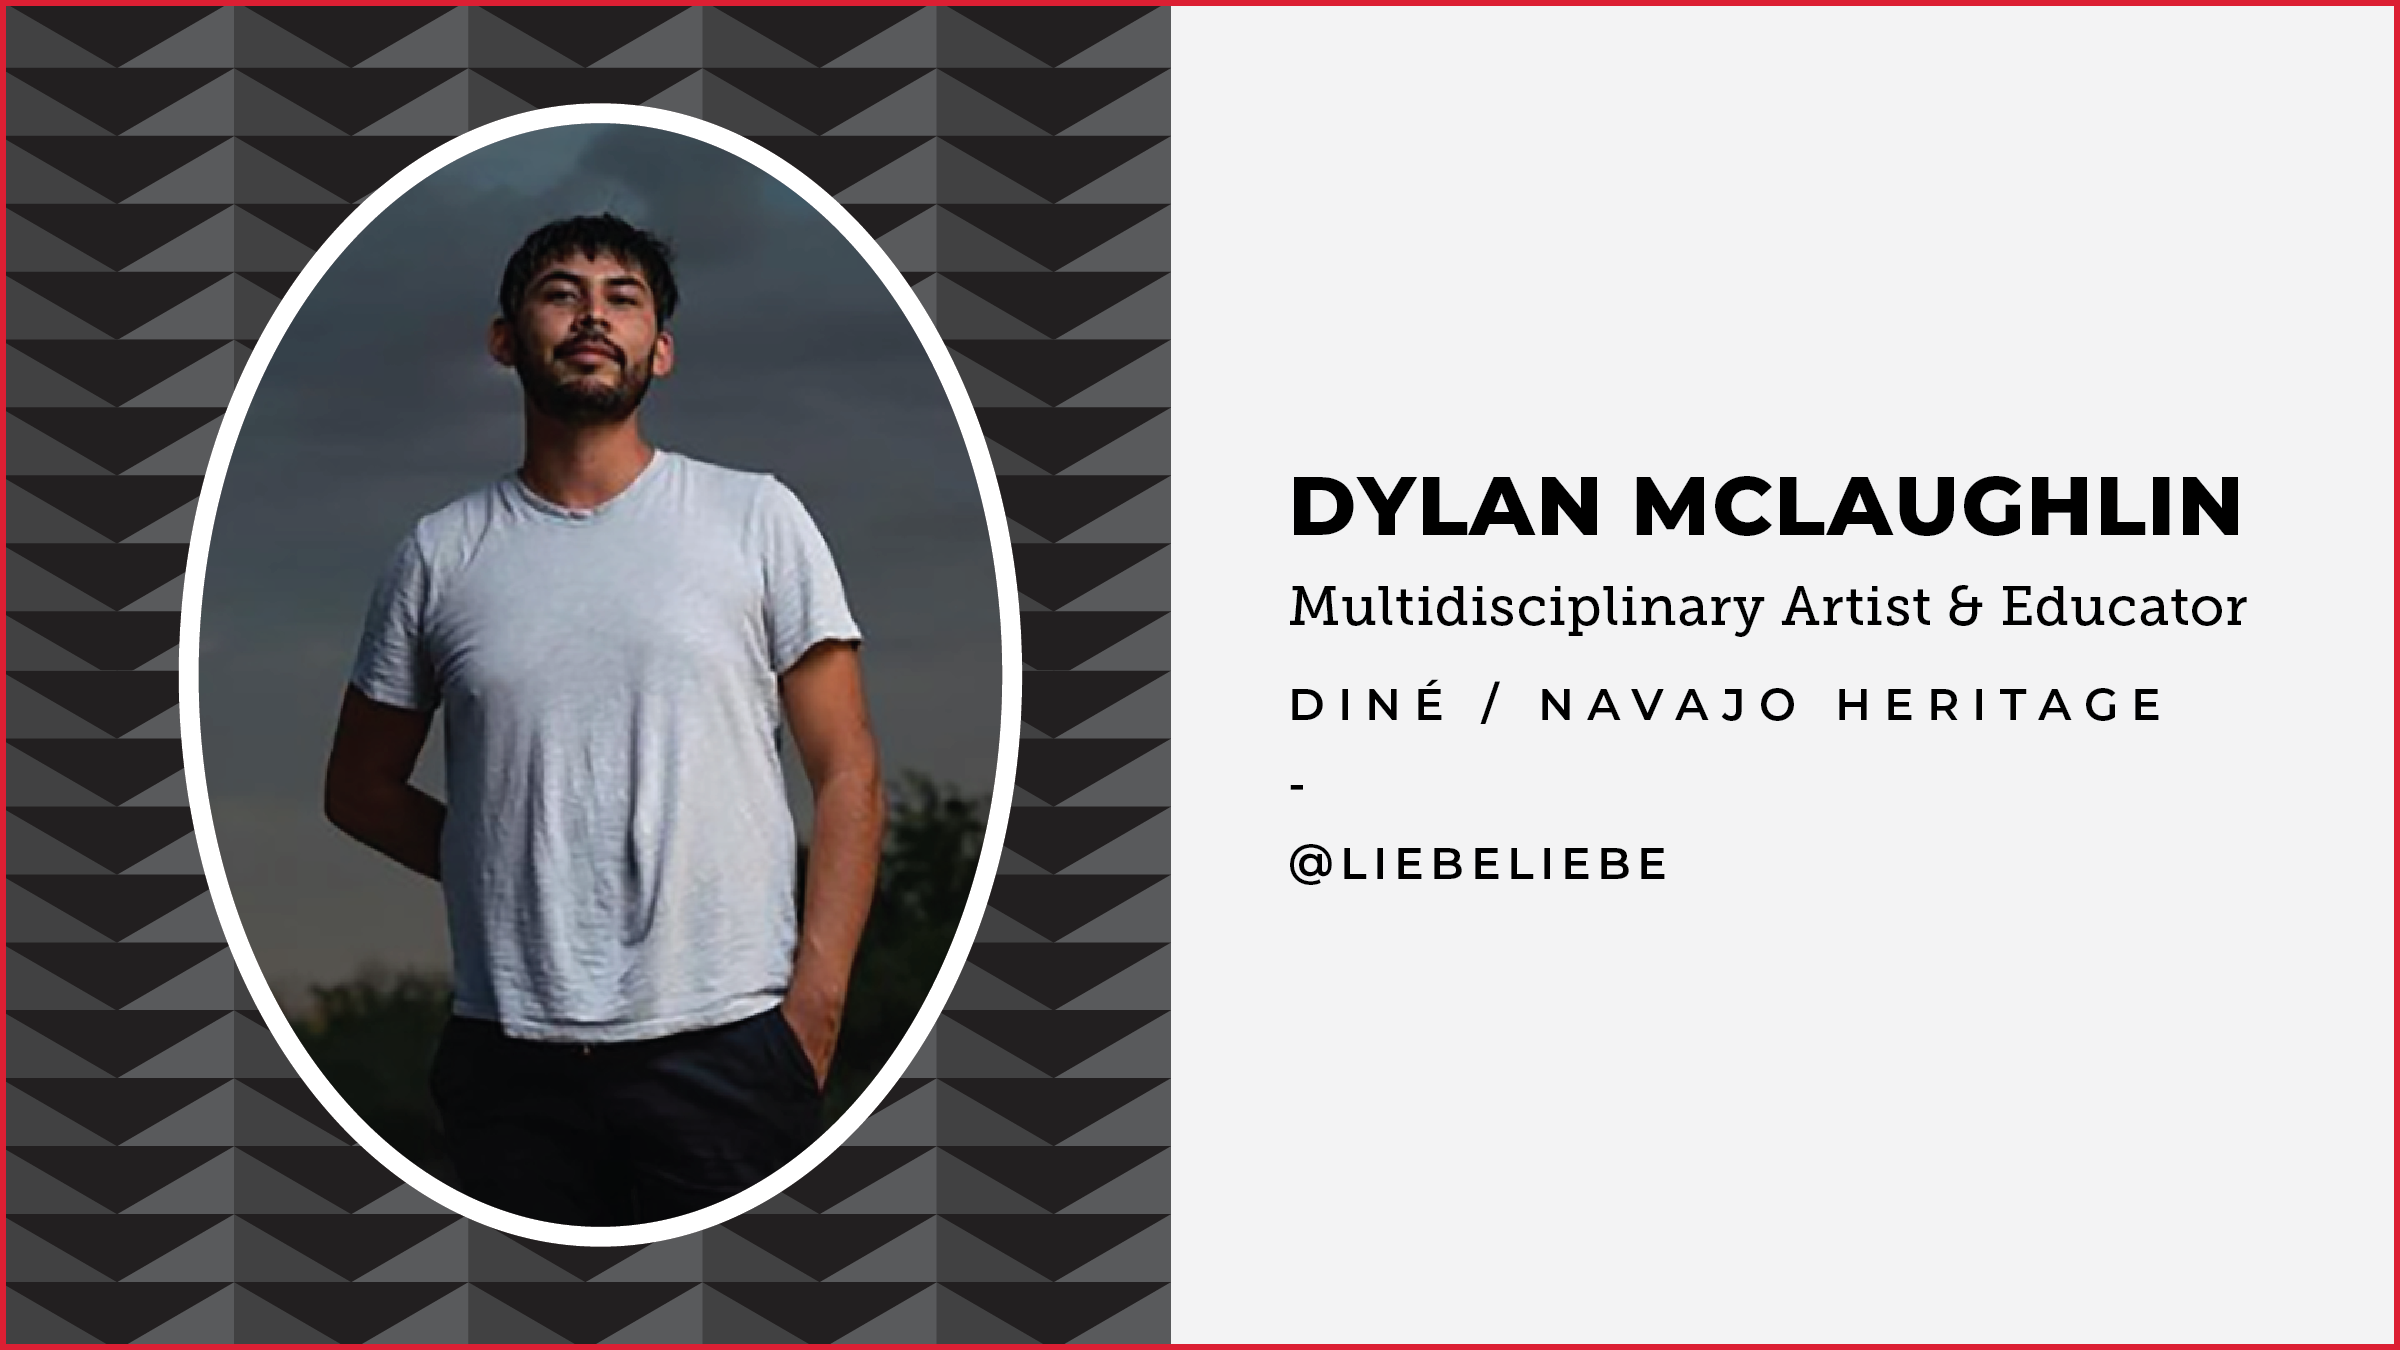 Artist biography for Dylan McLaughlin at Native Outdoors in connection with Winter Park Resort